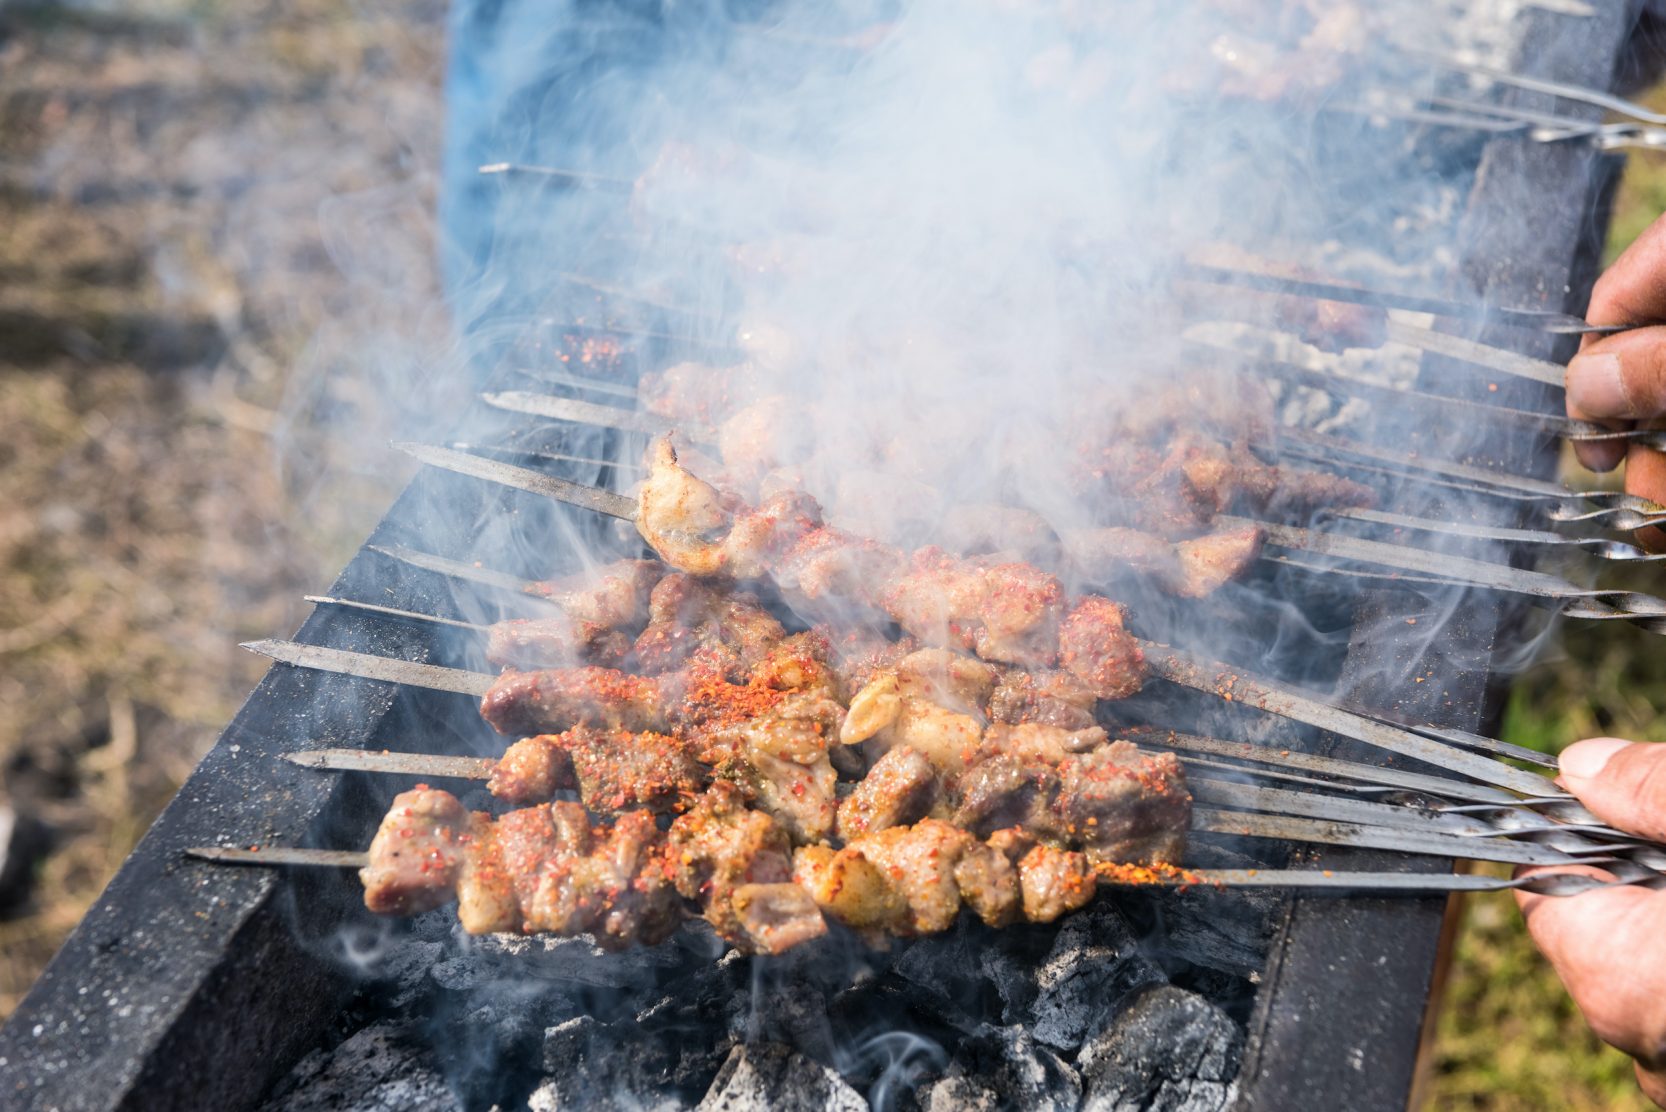 Barbecue and shisha are not allowed on Al-Wakrah public beach!